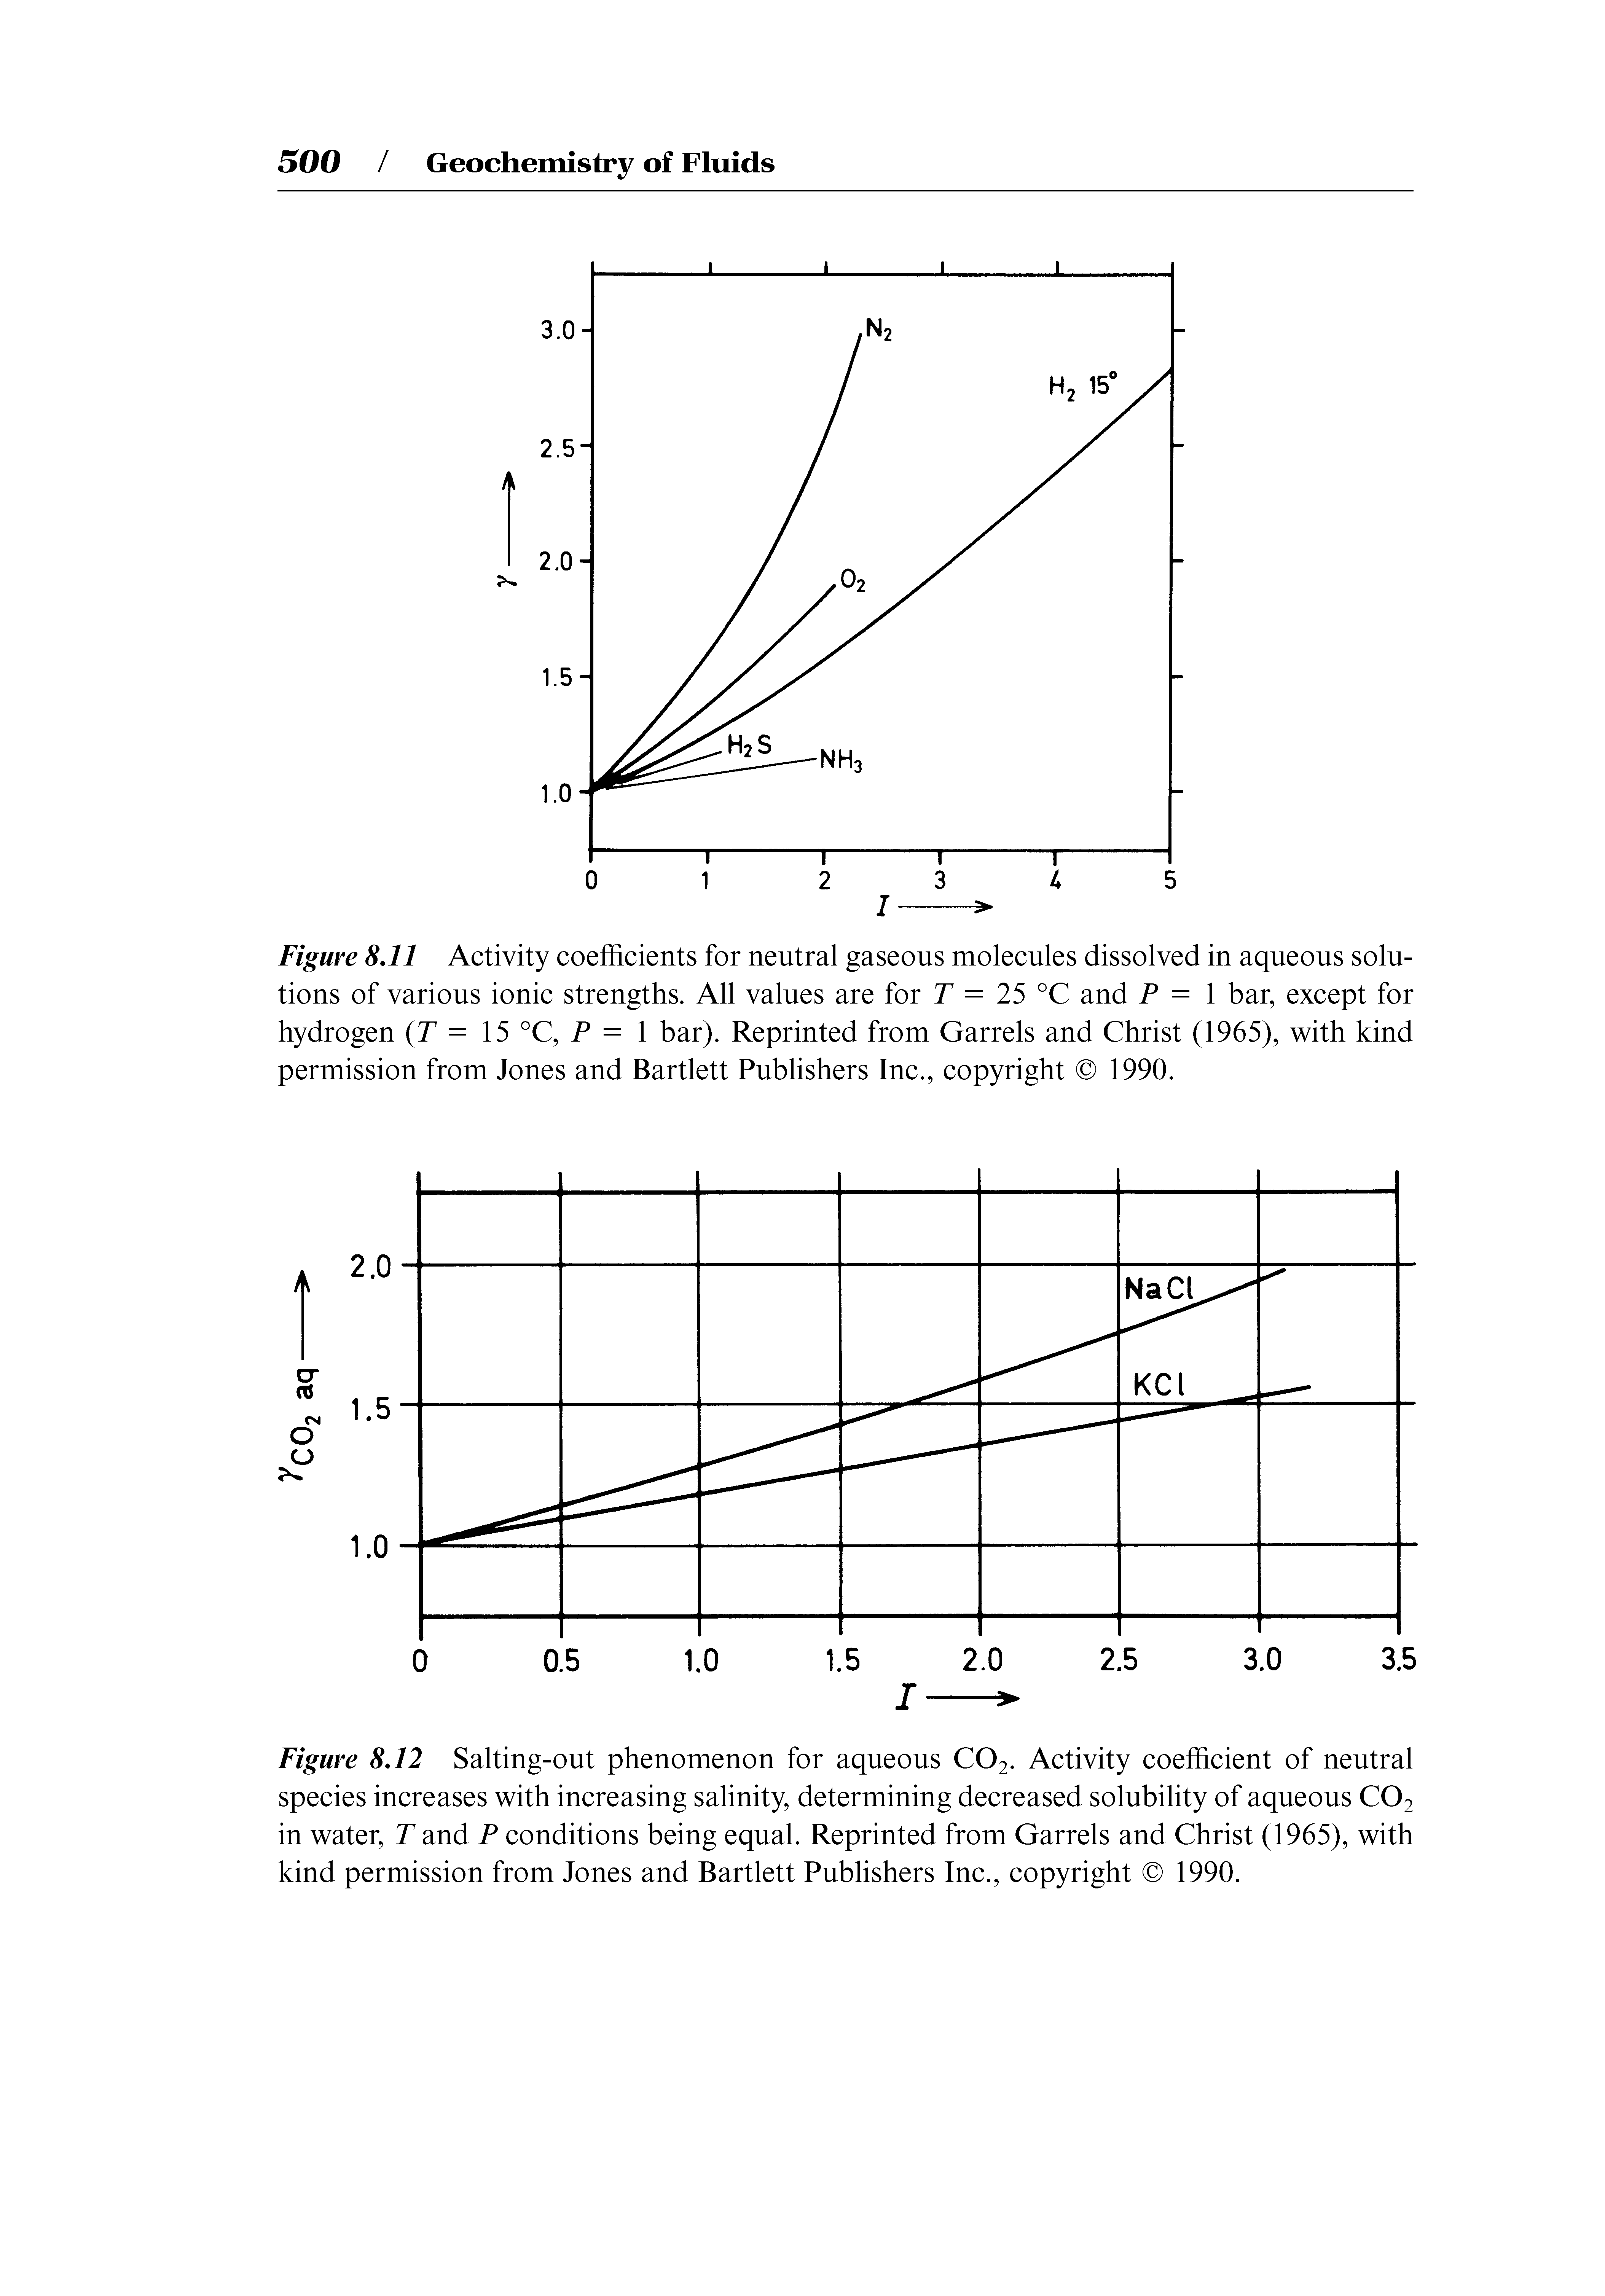 Figure 8,12 Salting-out phenomenon for aqueous CO2. Activity coefficient of neutral species increases with increasing salinity, determining decreased solubility of aqueous CO2 in water, T and P conditions being equal. Reprinted from Garrels and Christ (1965), with kind permission from Jones and Bartlett Publishers Inc., copyright 1990.